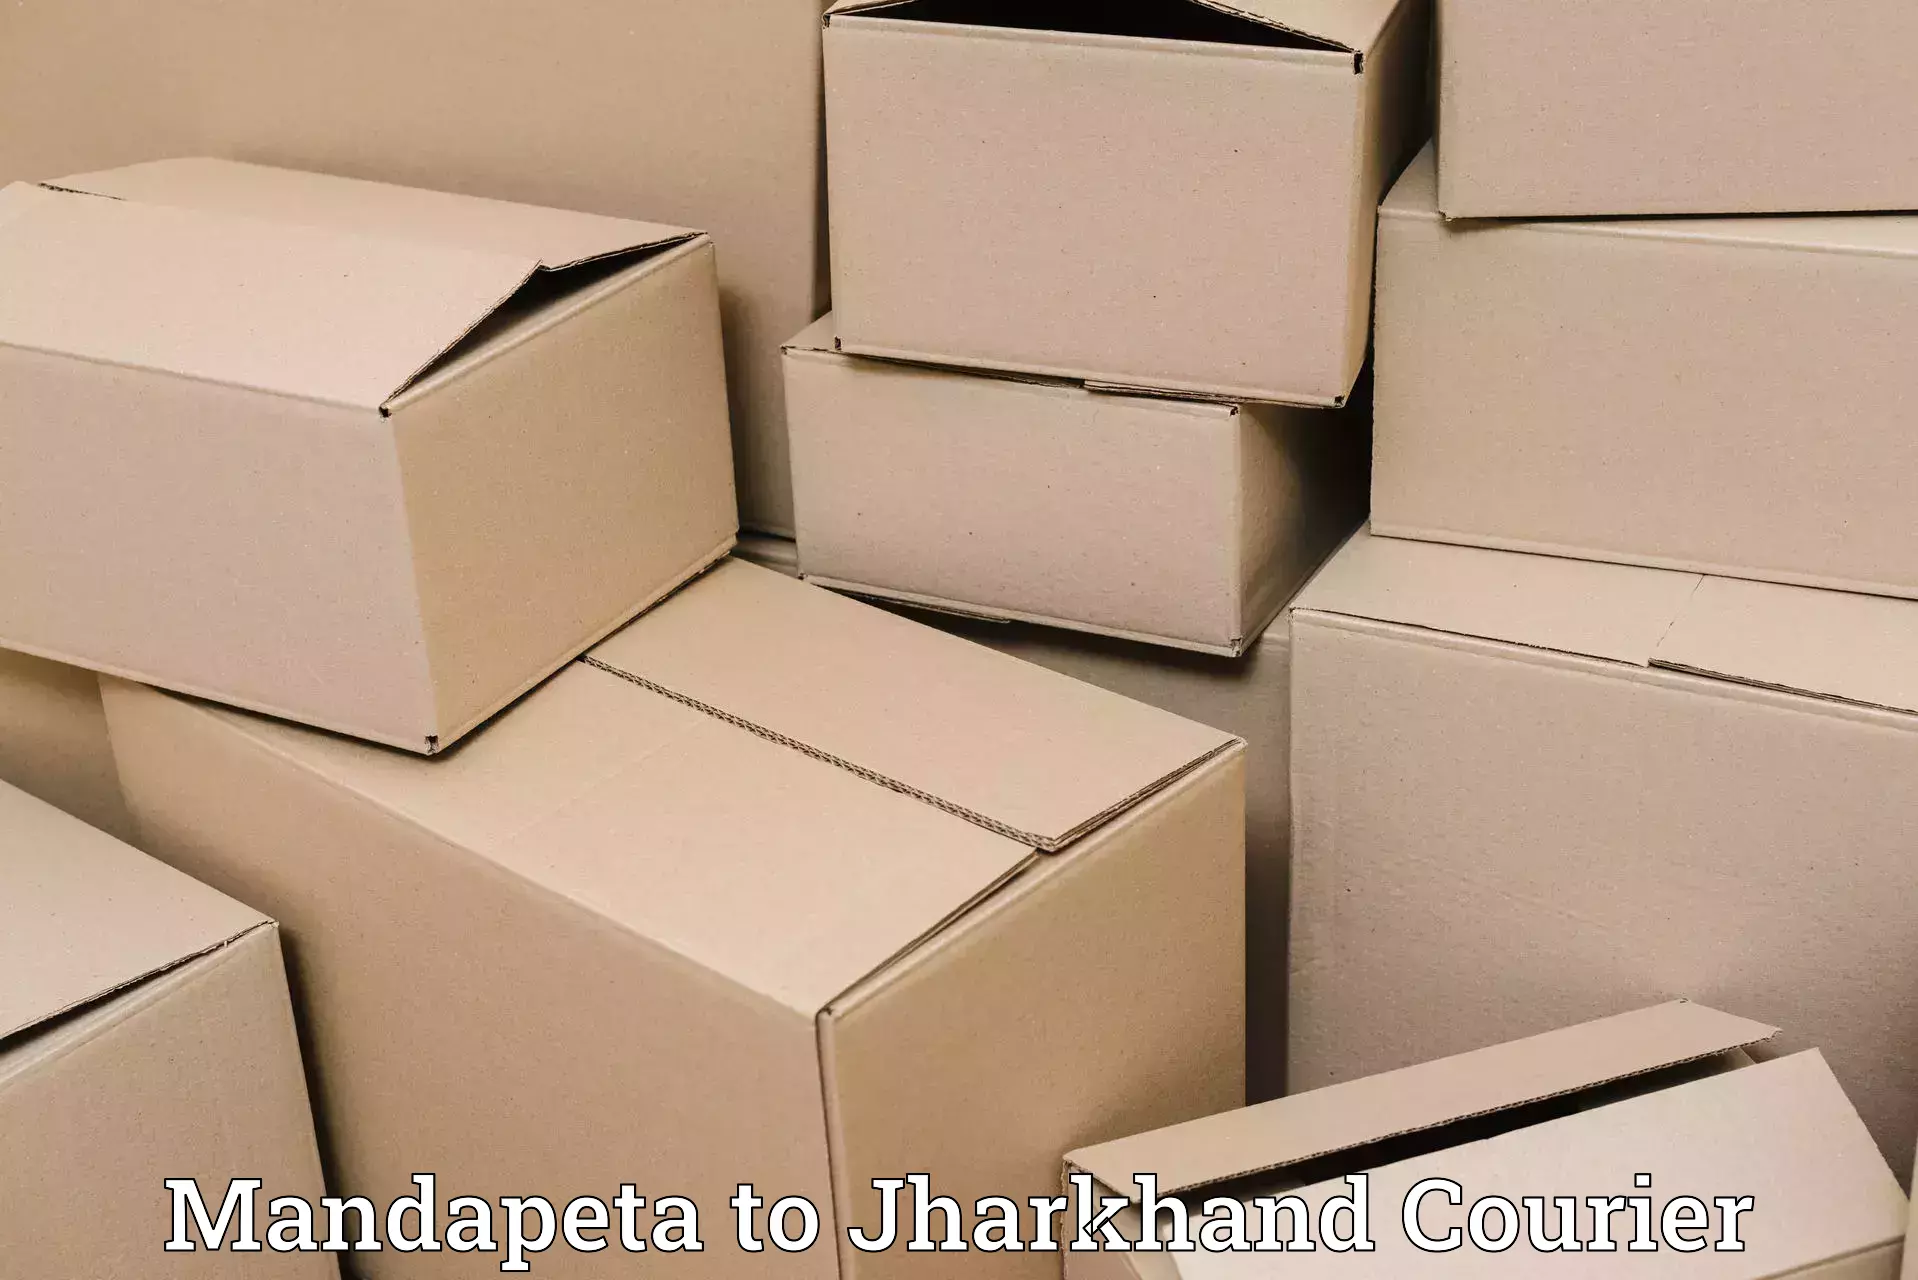 Reliable delivery network Mandapeta to Chandil